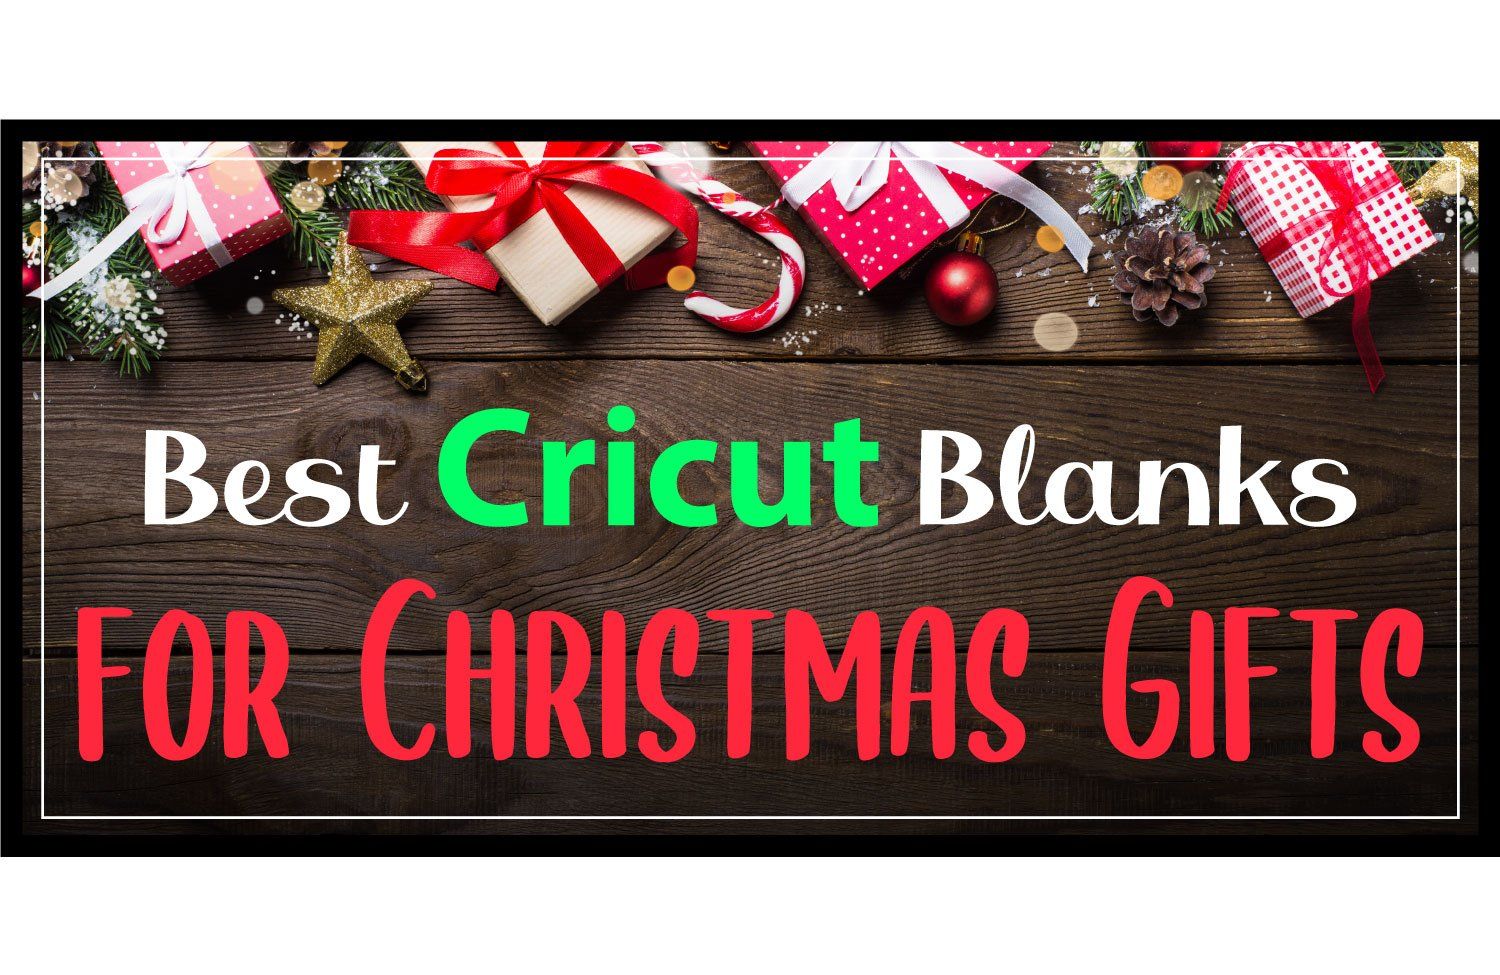 20 Best Cricut Blanks for Christmas Gifts on Amazon